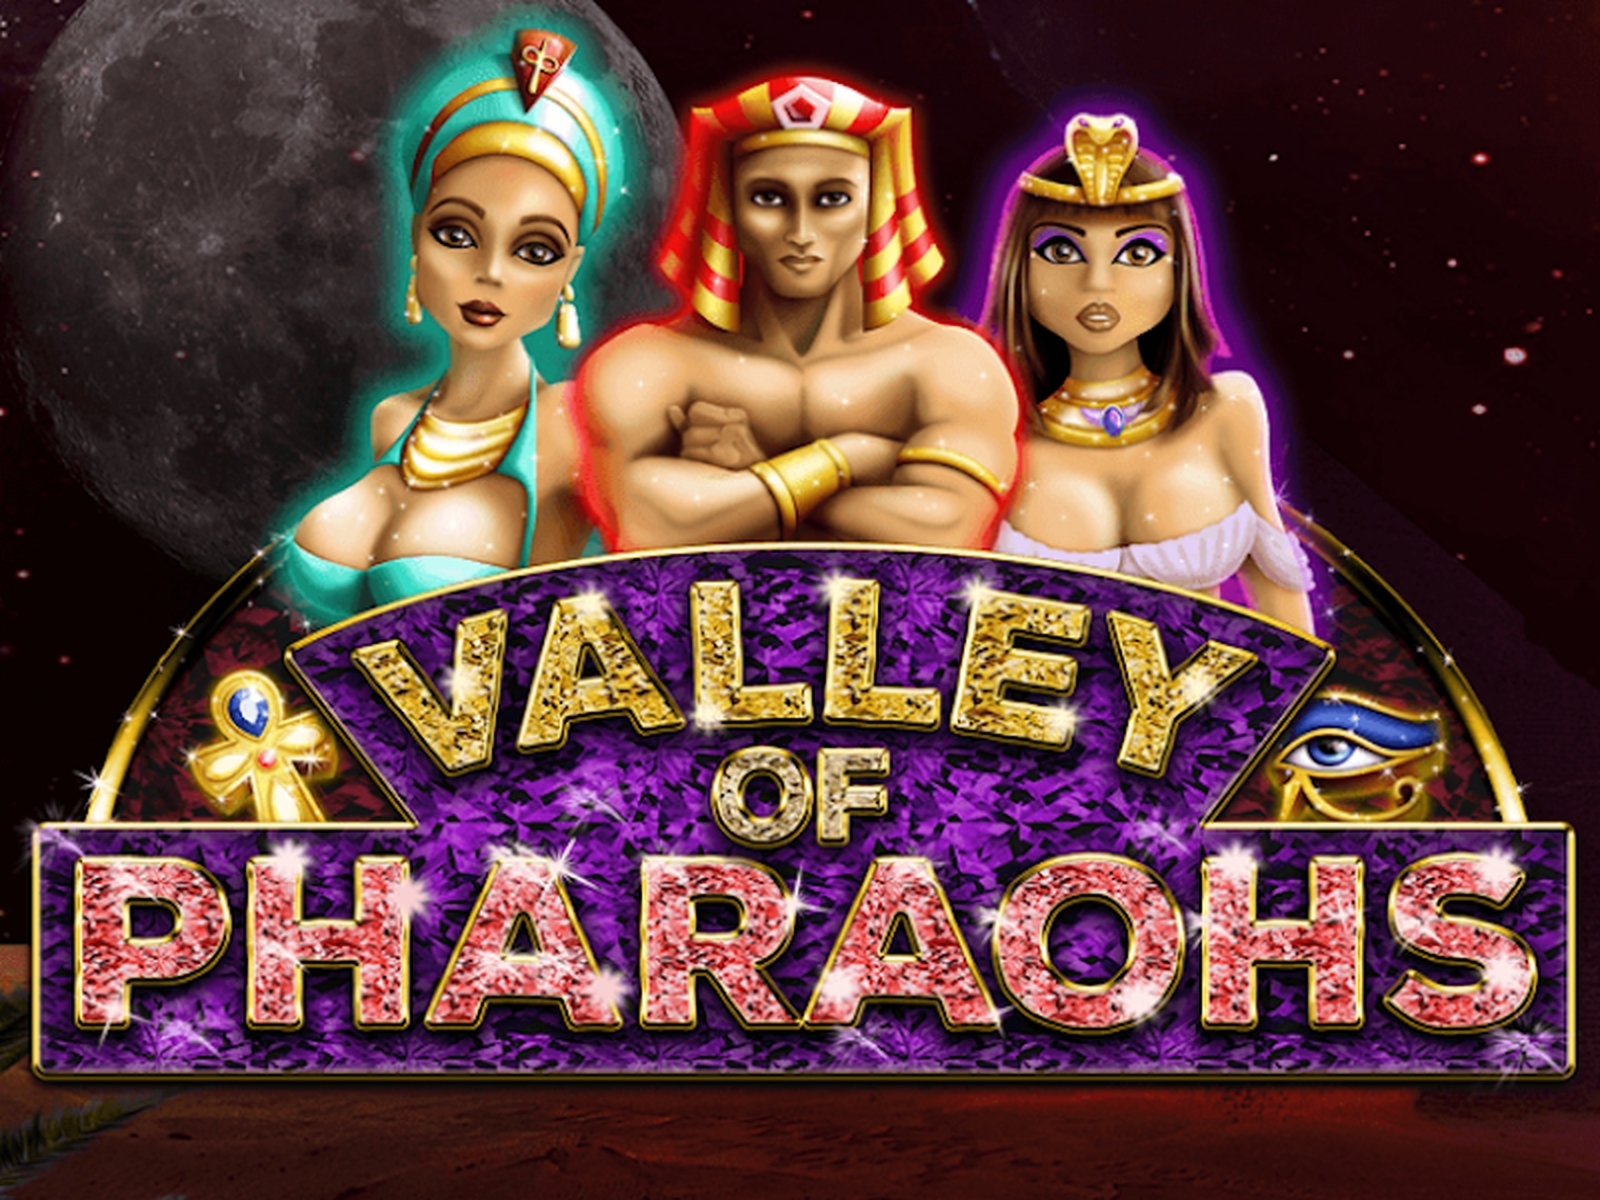 Valley of Pharaohs demo